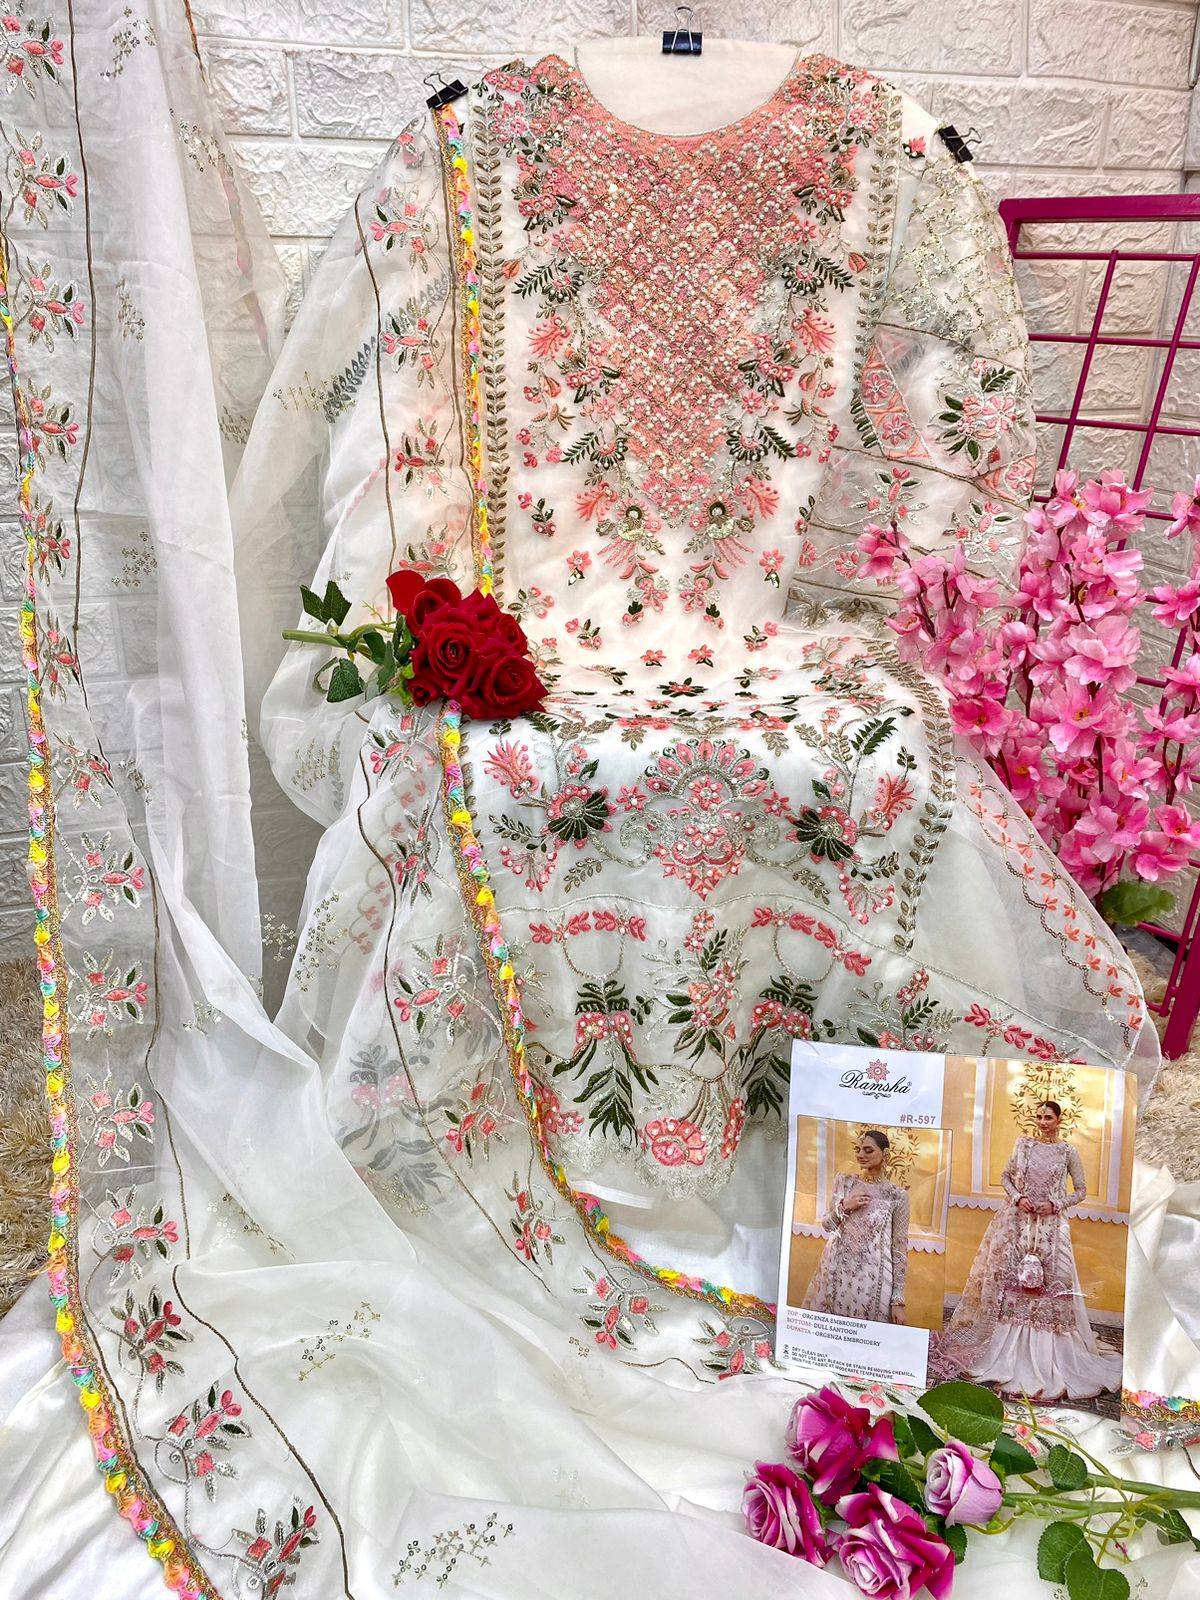 Ramsha Hit Design 597 By Ramsha Beautiful Pakistani Suits Colorful Stylish Fancy Casual Wear & Ethnic Wear Organza Embroidered Dresses At Wholesale Price